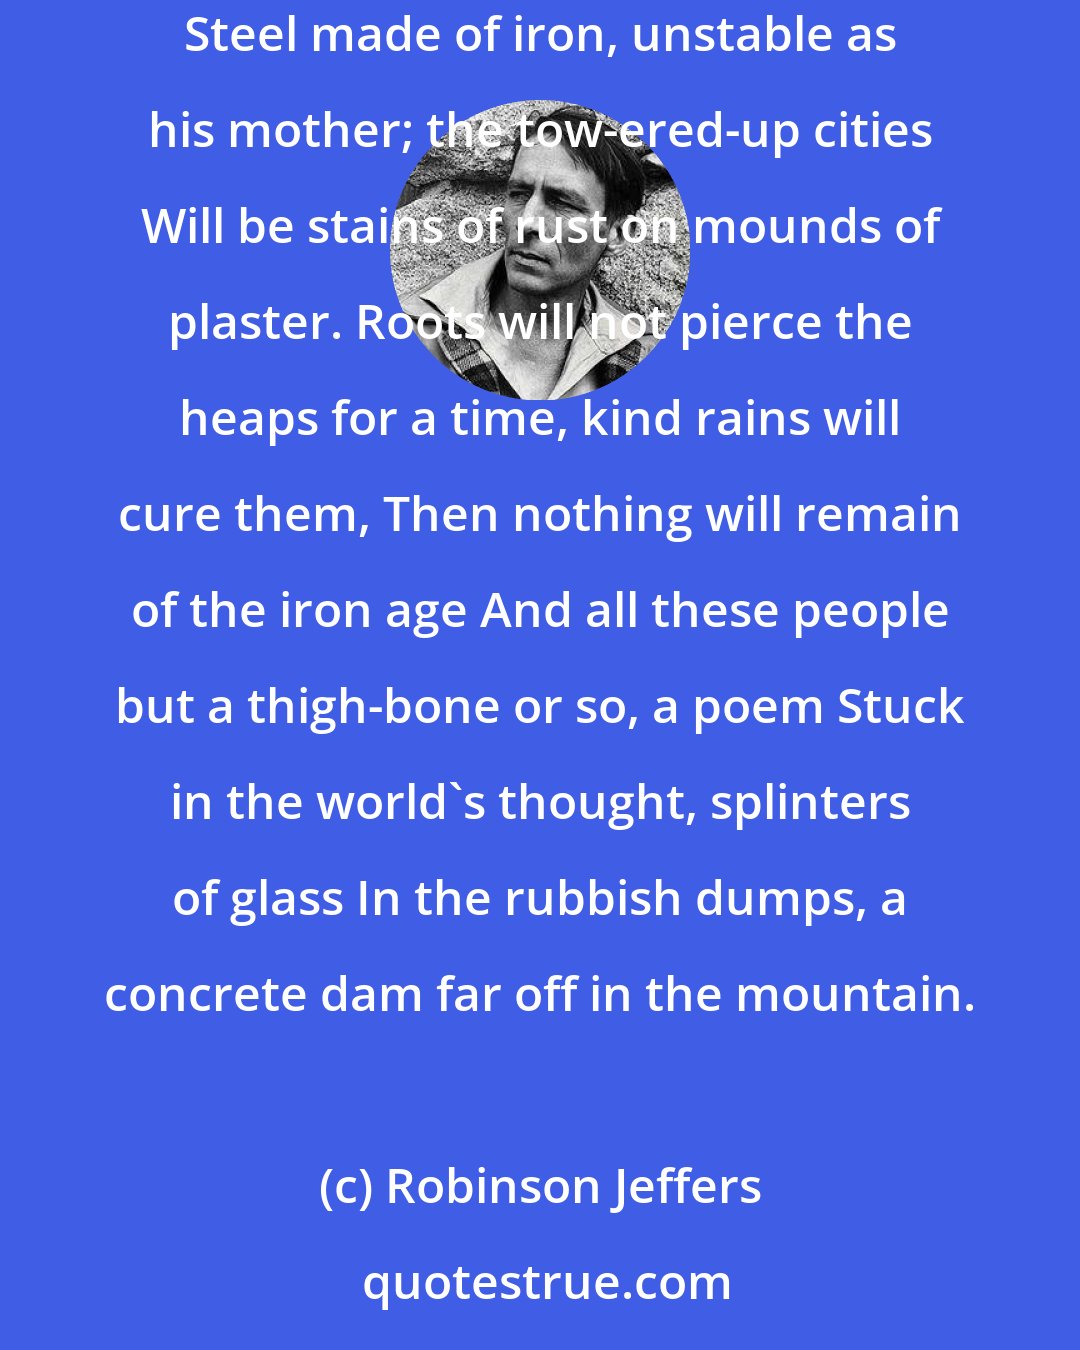 Robinson Jeffers: When the sun shouts and people abound One thinks there were the ages of stone and the age of bronze And the iron age; iron the unstable metal; Steel made of iron, unstable as his mother; the tow-ered-up cities Will be stains of rust on mounds of plaster. Roots will not pierce the heaps for a time, kind rains will cure them, Then nothing will remain of the iron age And all these people but a thigh-bone or so, a poem Stuck in the world's thought, splinters of glass In the rubbish dumps, a concrete dam far off in the mountain.